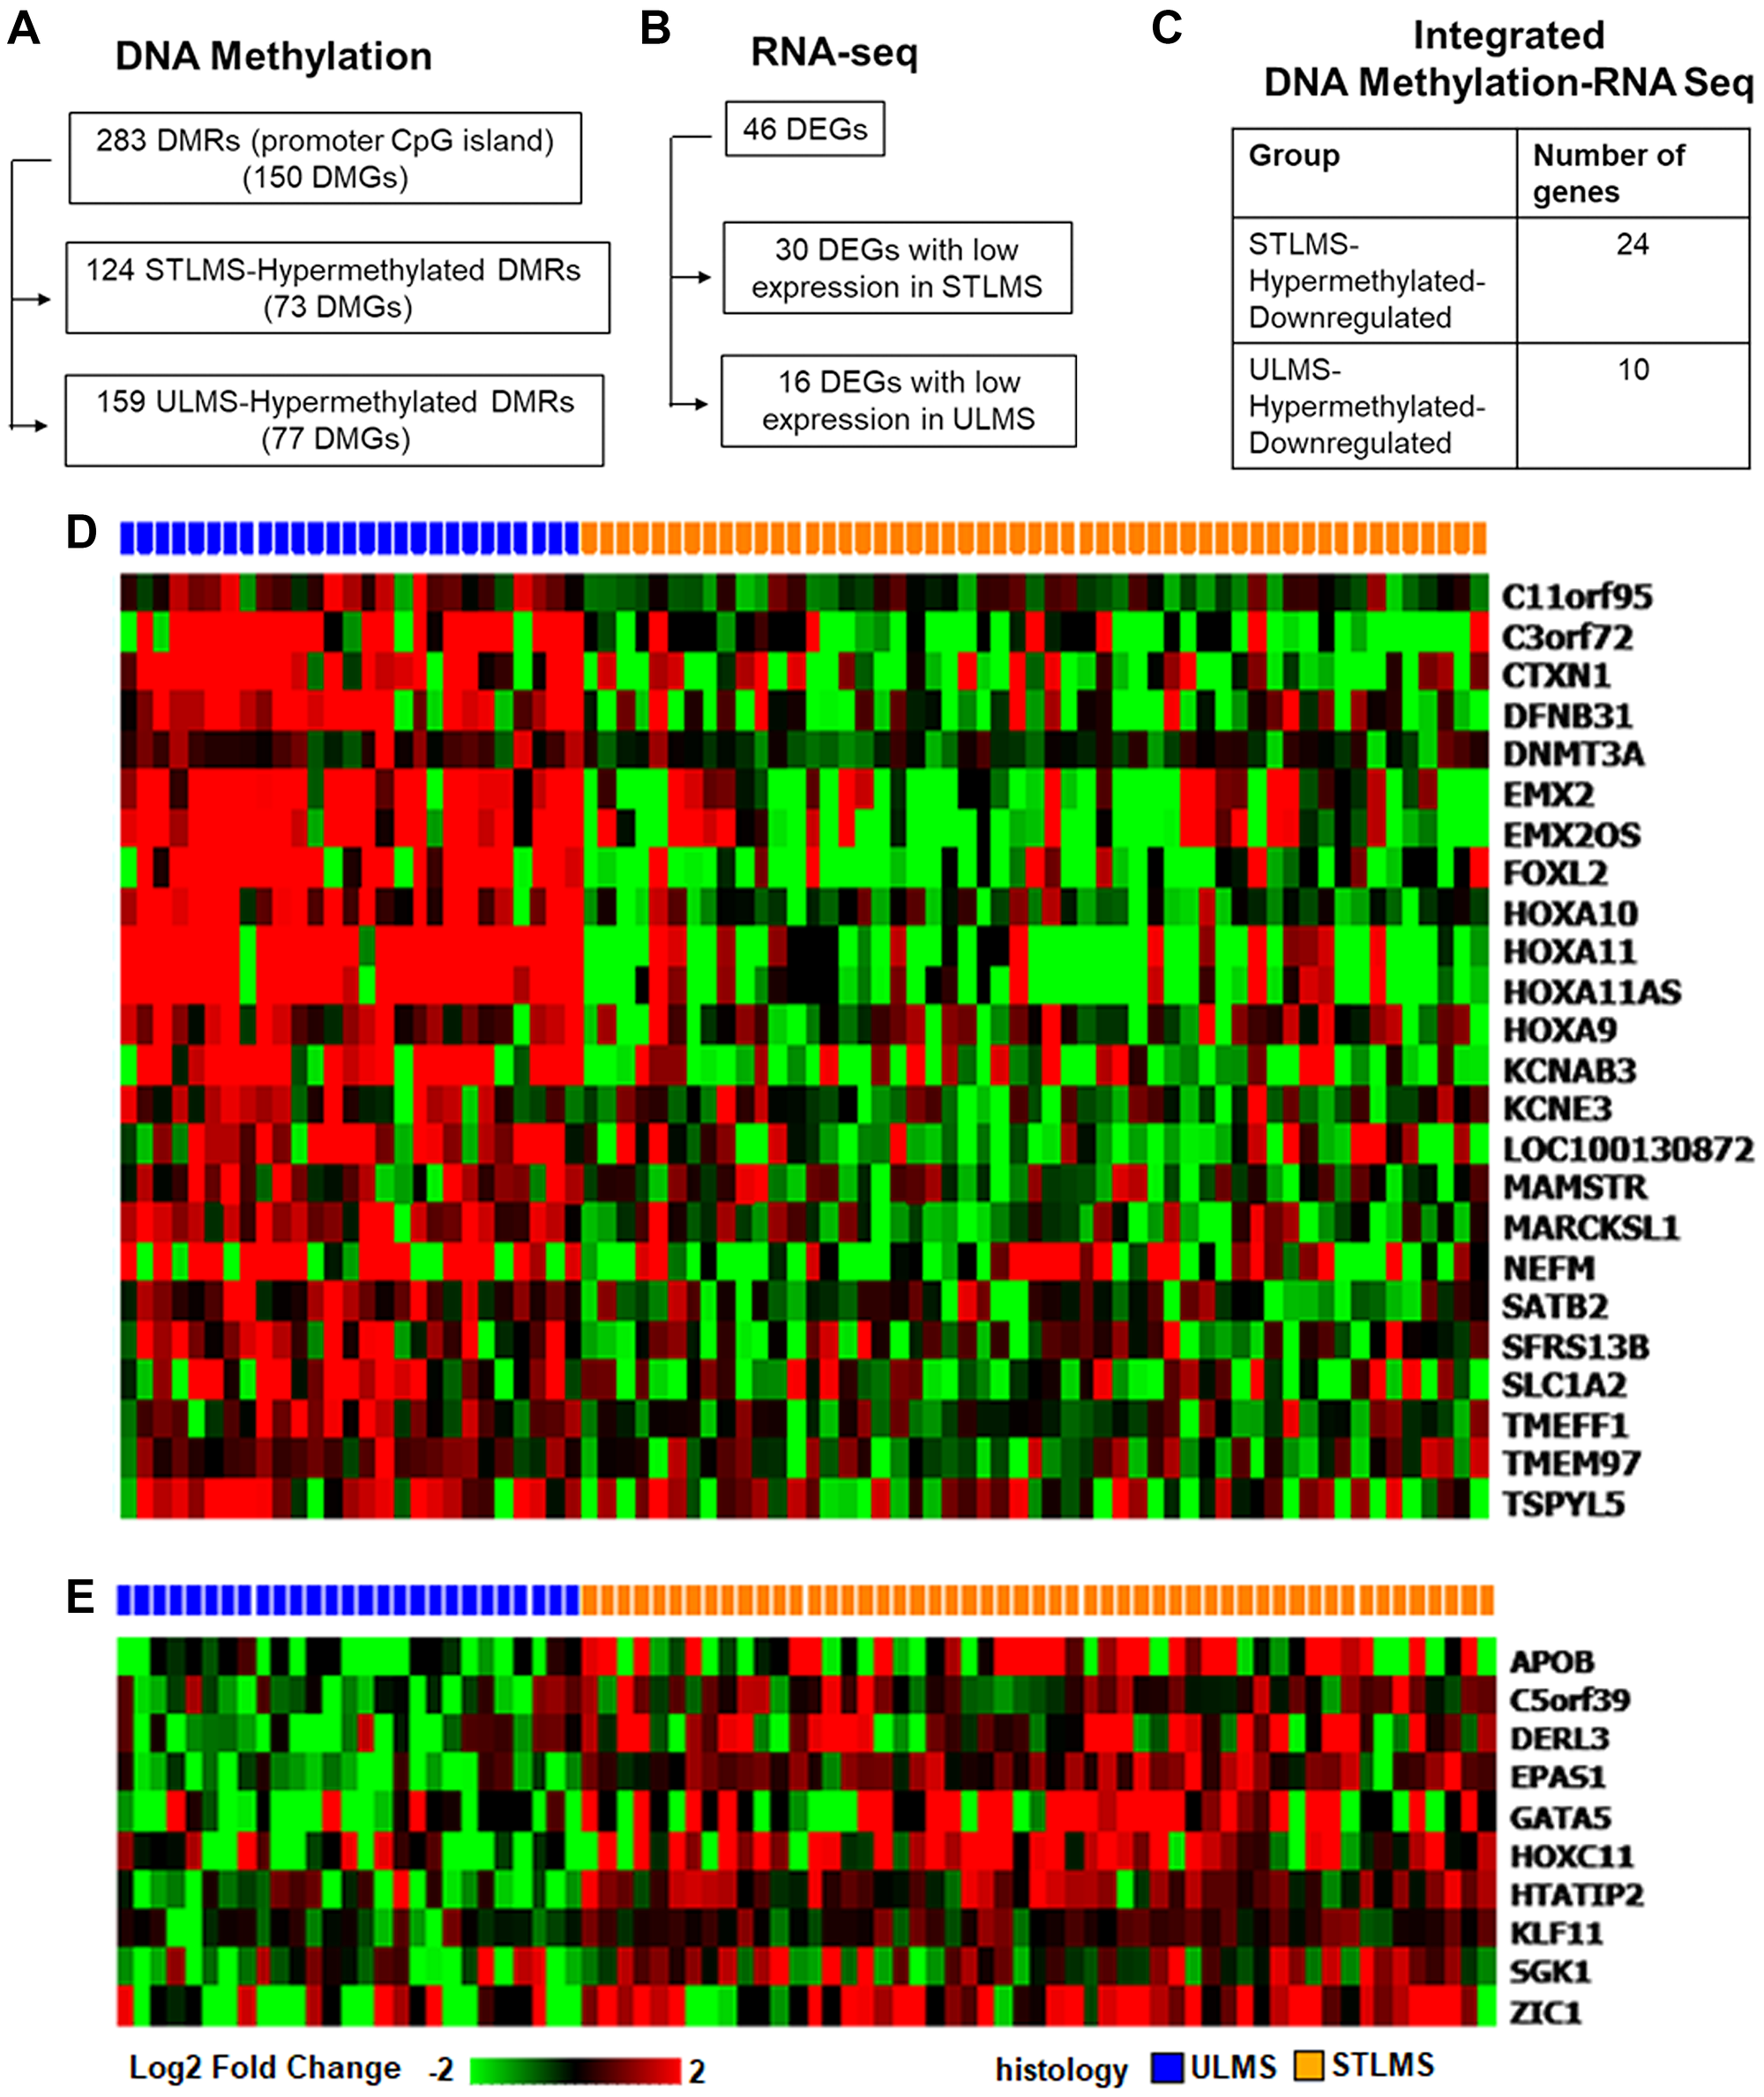 Integrated analysis of differentially methylated and expressed genes in ULMS and STLMS.